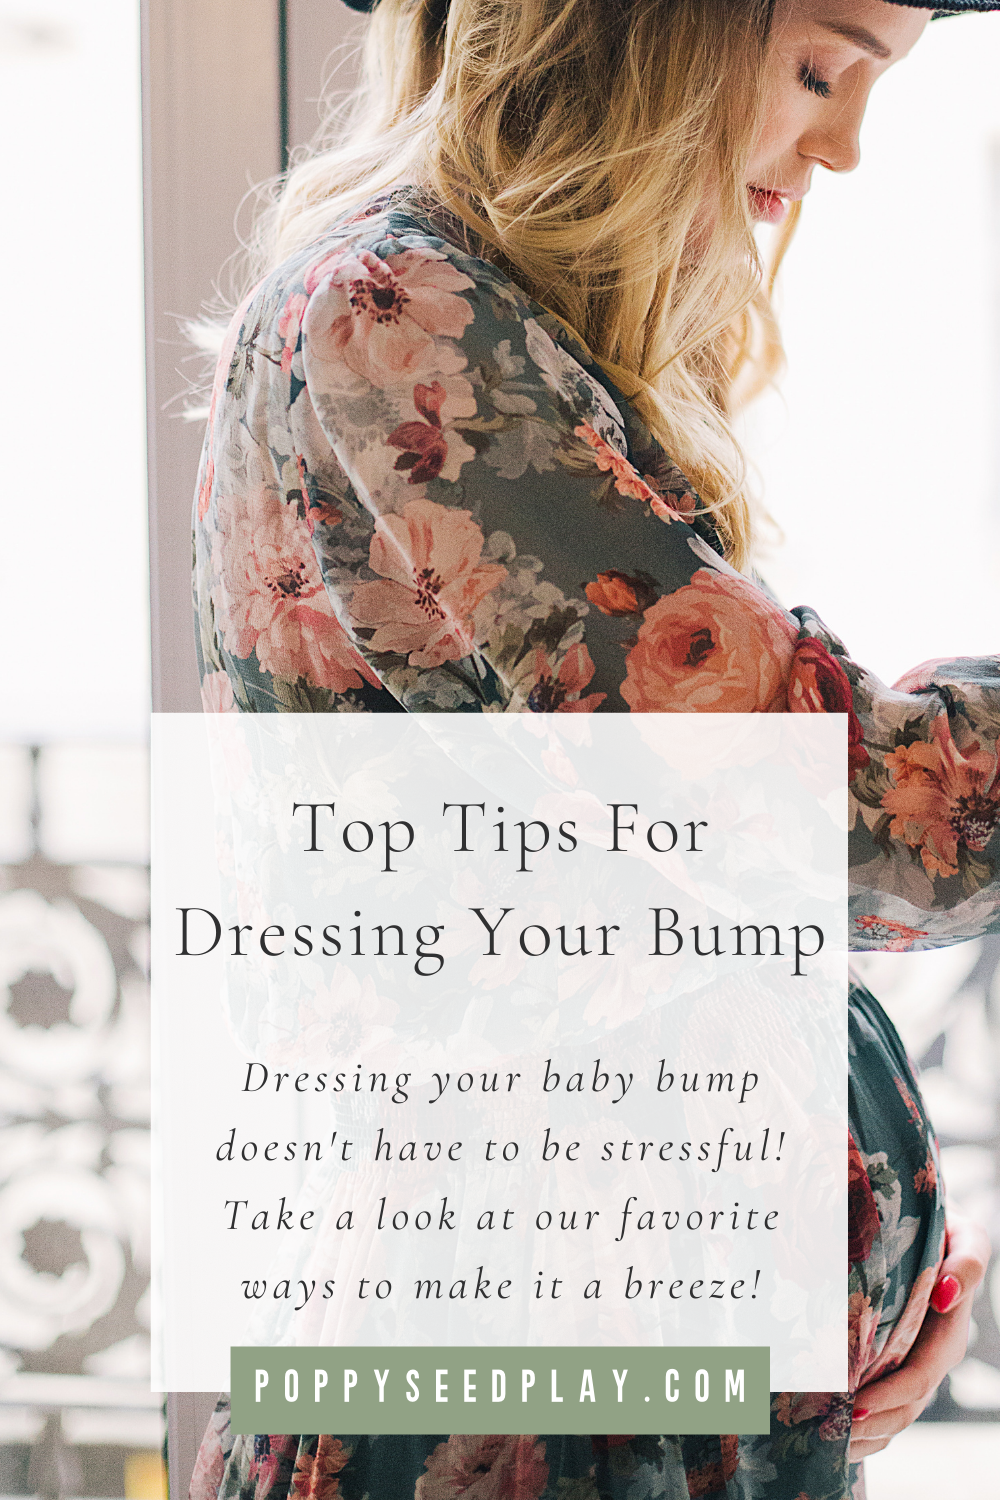 Our Favorite Tips for Dressing Your Bump